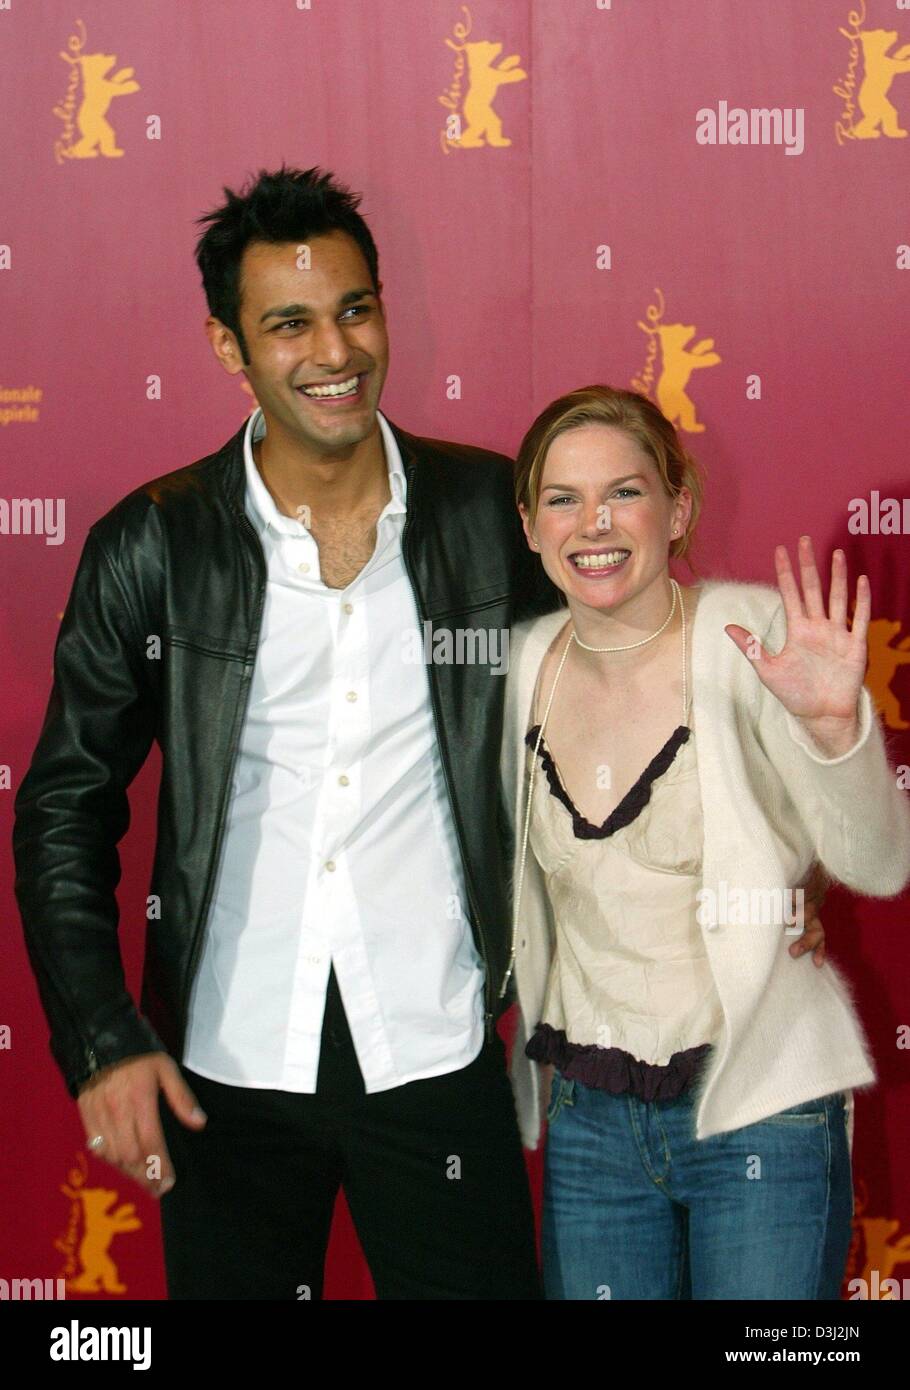 (dpa) - British actors Eva Birthistle and Atta Yaqub smiles as they attend a press conference during the 54th Berlinale International Film Festival in Berlin, 13 February 2004. Birthistle and Yaqub presented their new film 'A Fond Kiss'. The film tells the love story between a young Catholic woman from Glasgow and the son of Muslim immigrants from Pakistan. Stock Photo